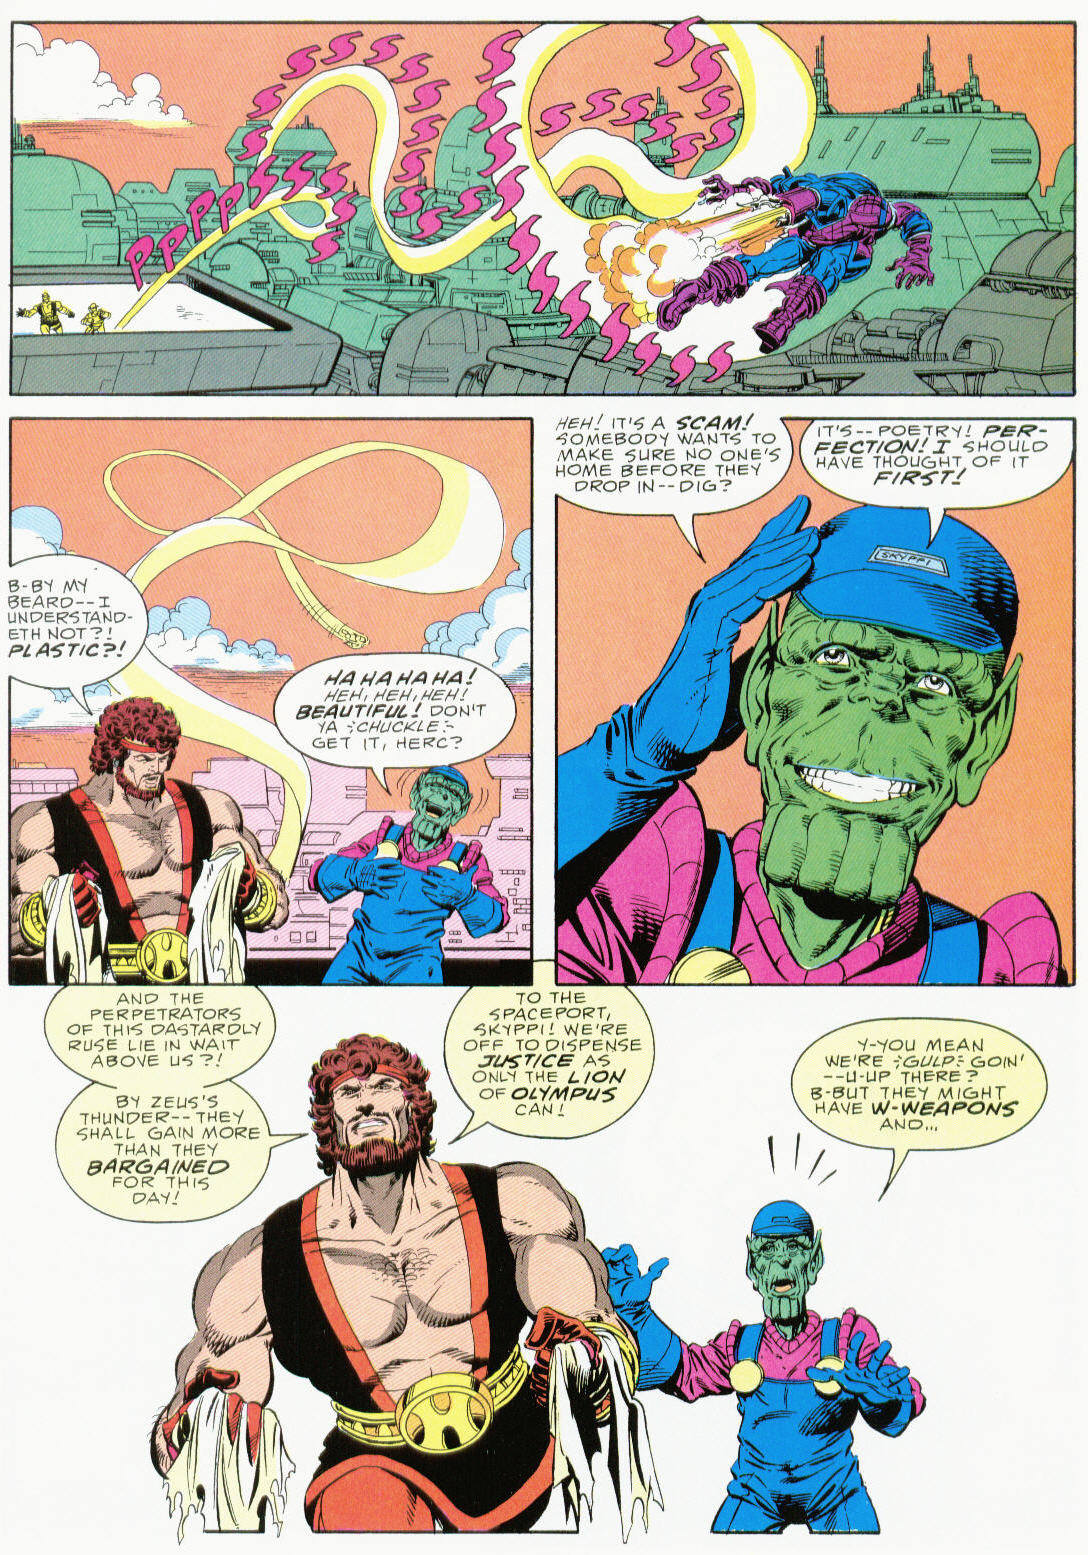 Marvel Graphic Novel issue 37 - Hercules Prince of Power - Full Circle - Page 27